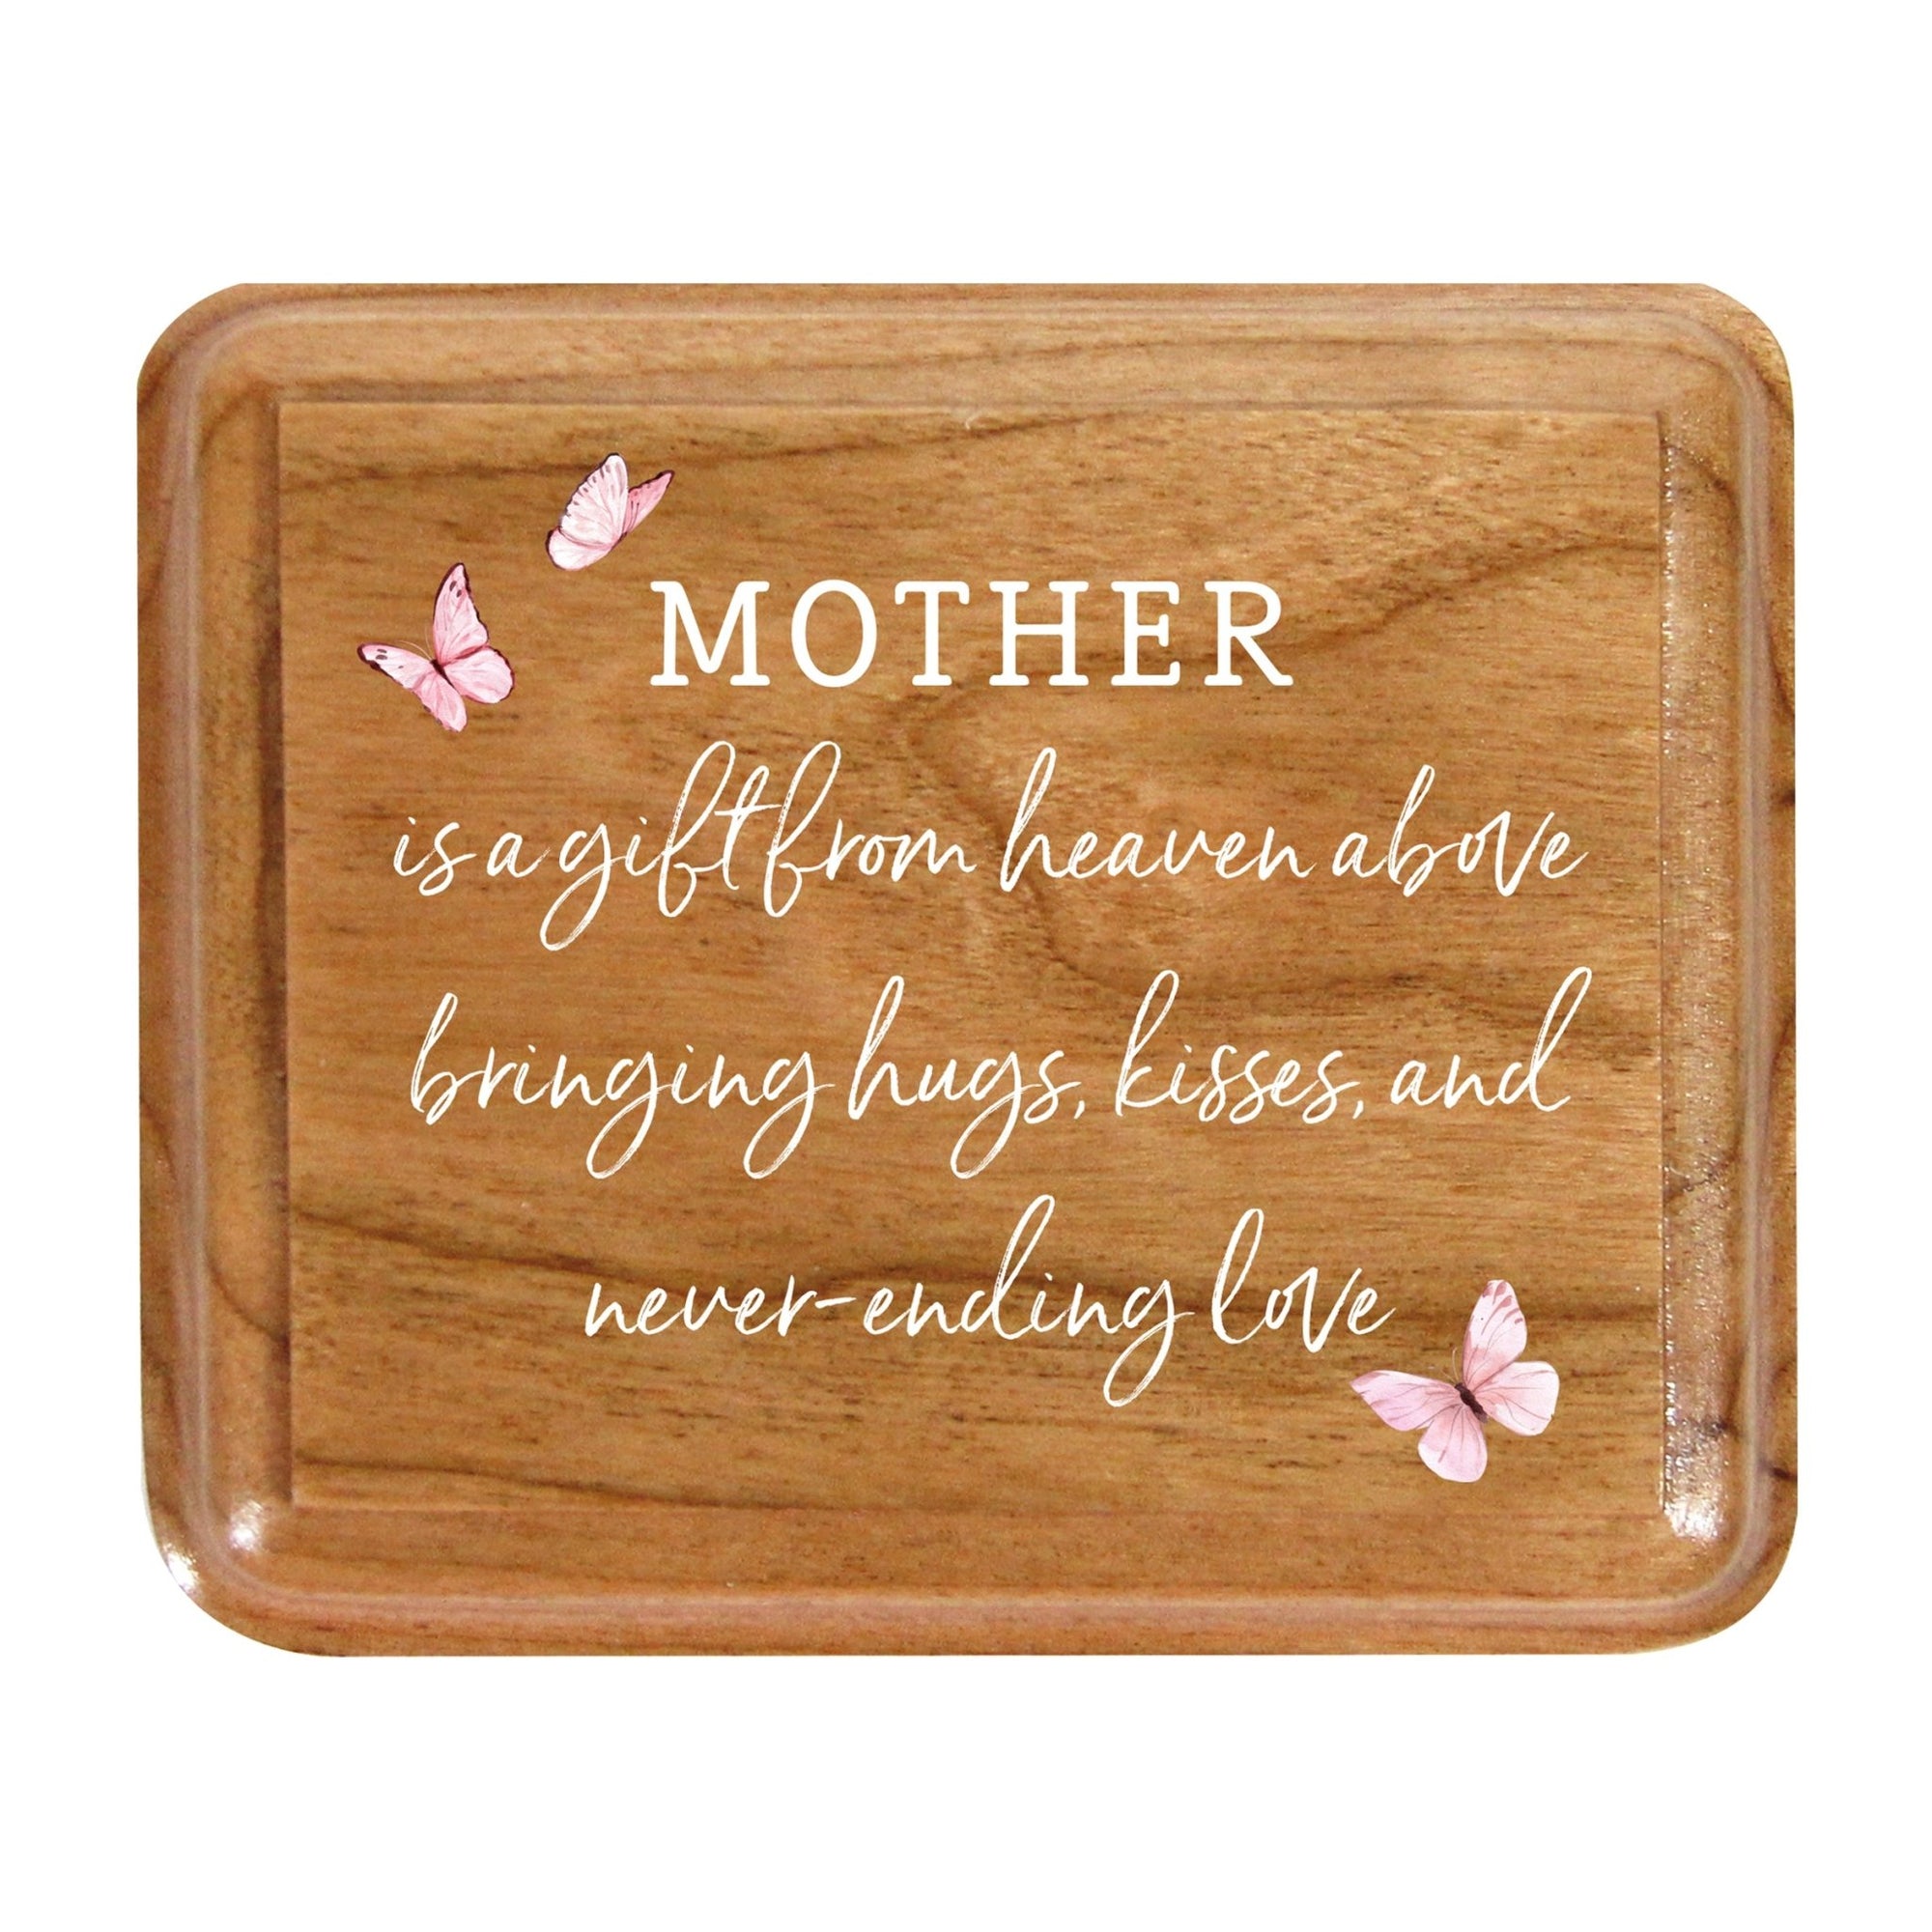 Modern Keepsake Box Inspirational Quotes for Mom 3.5x3 Mother Is A Gift - LifeSong Milestones